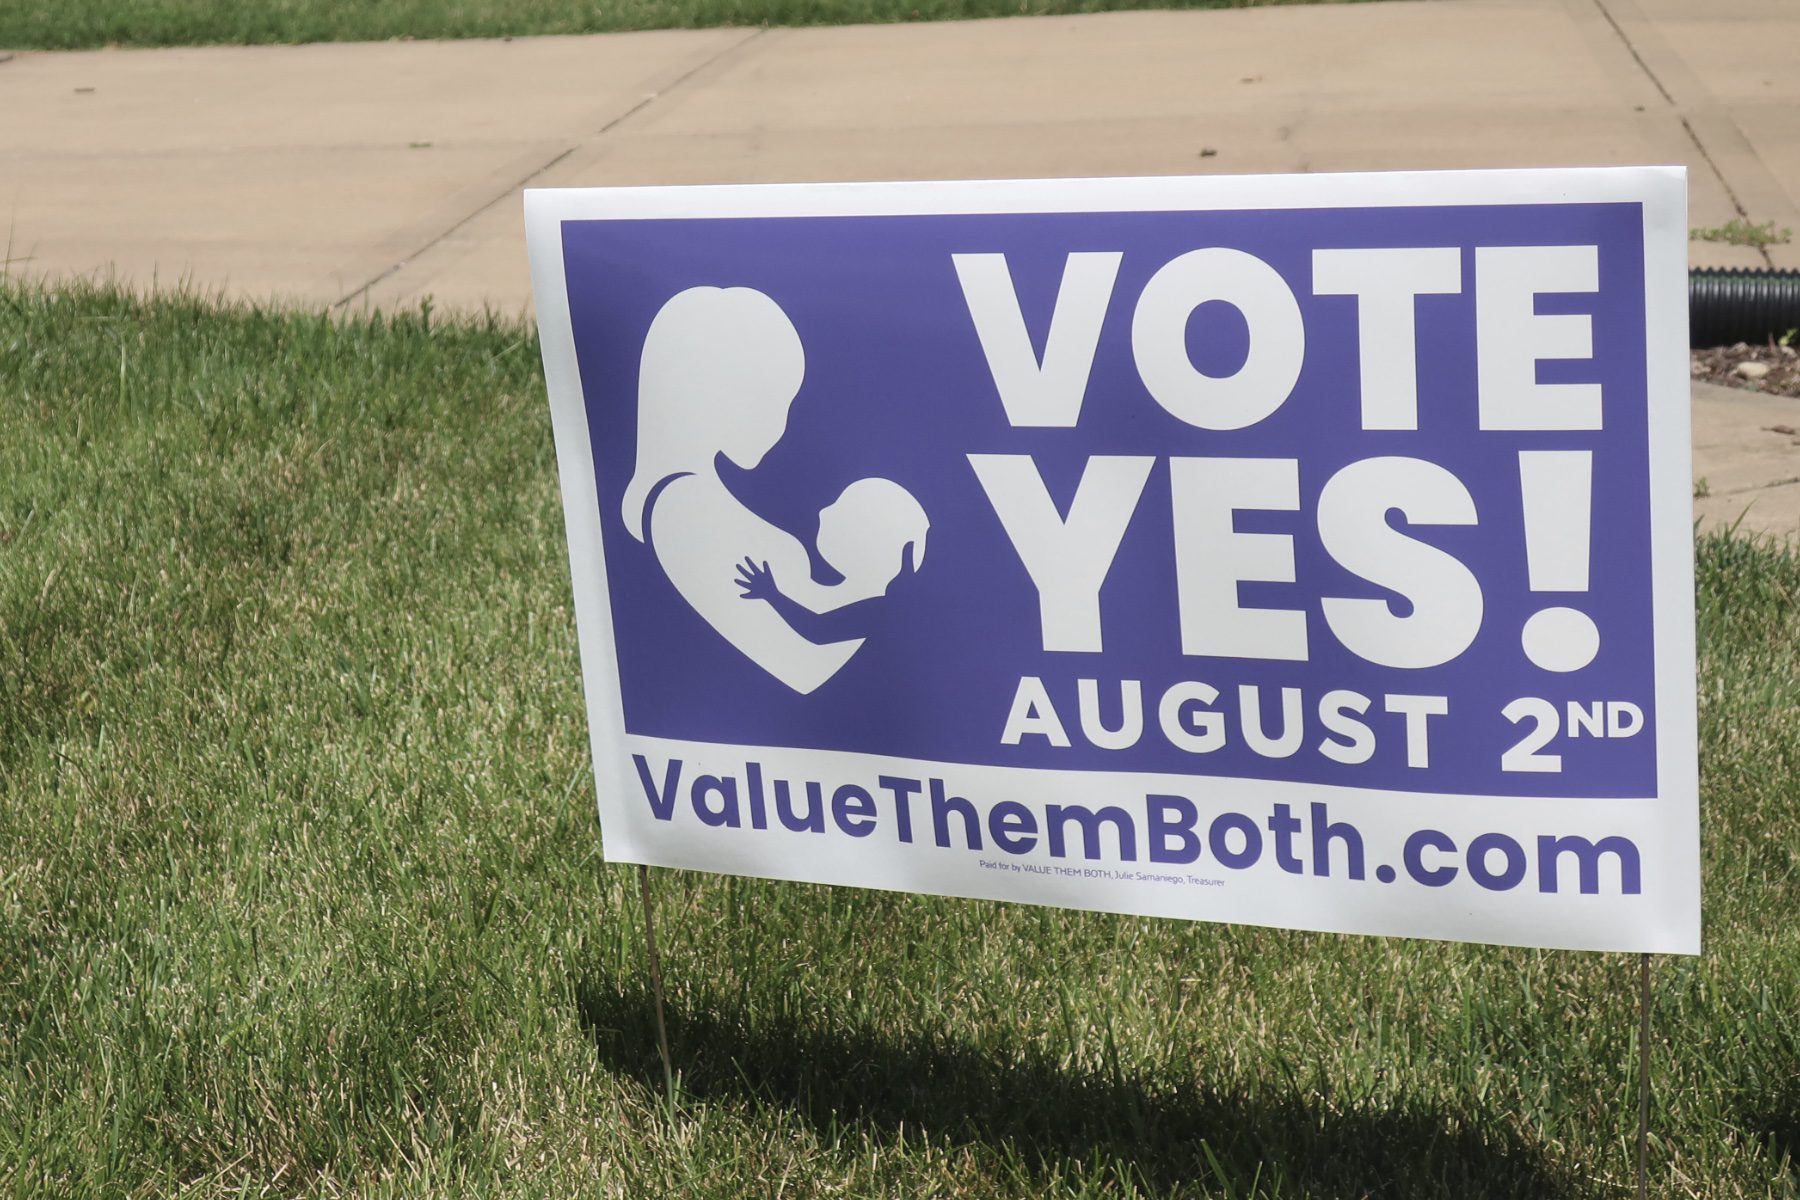 A purple sign reads "Vote Yes August 2, valuethemboth.com."